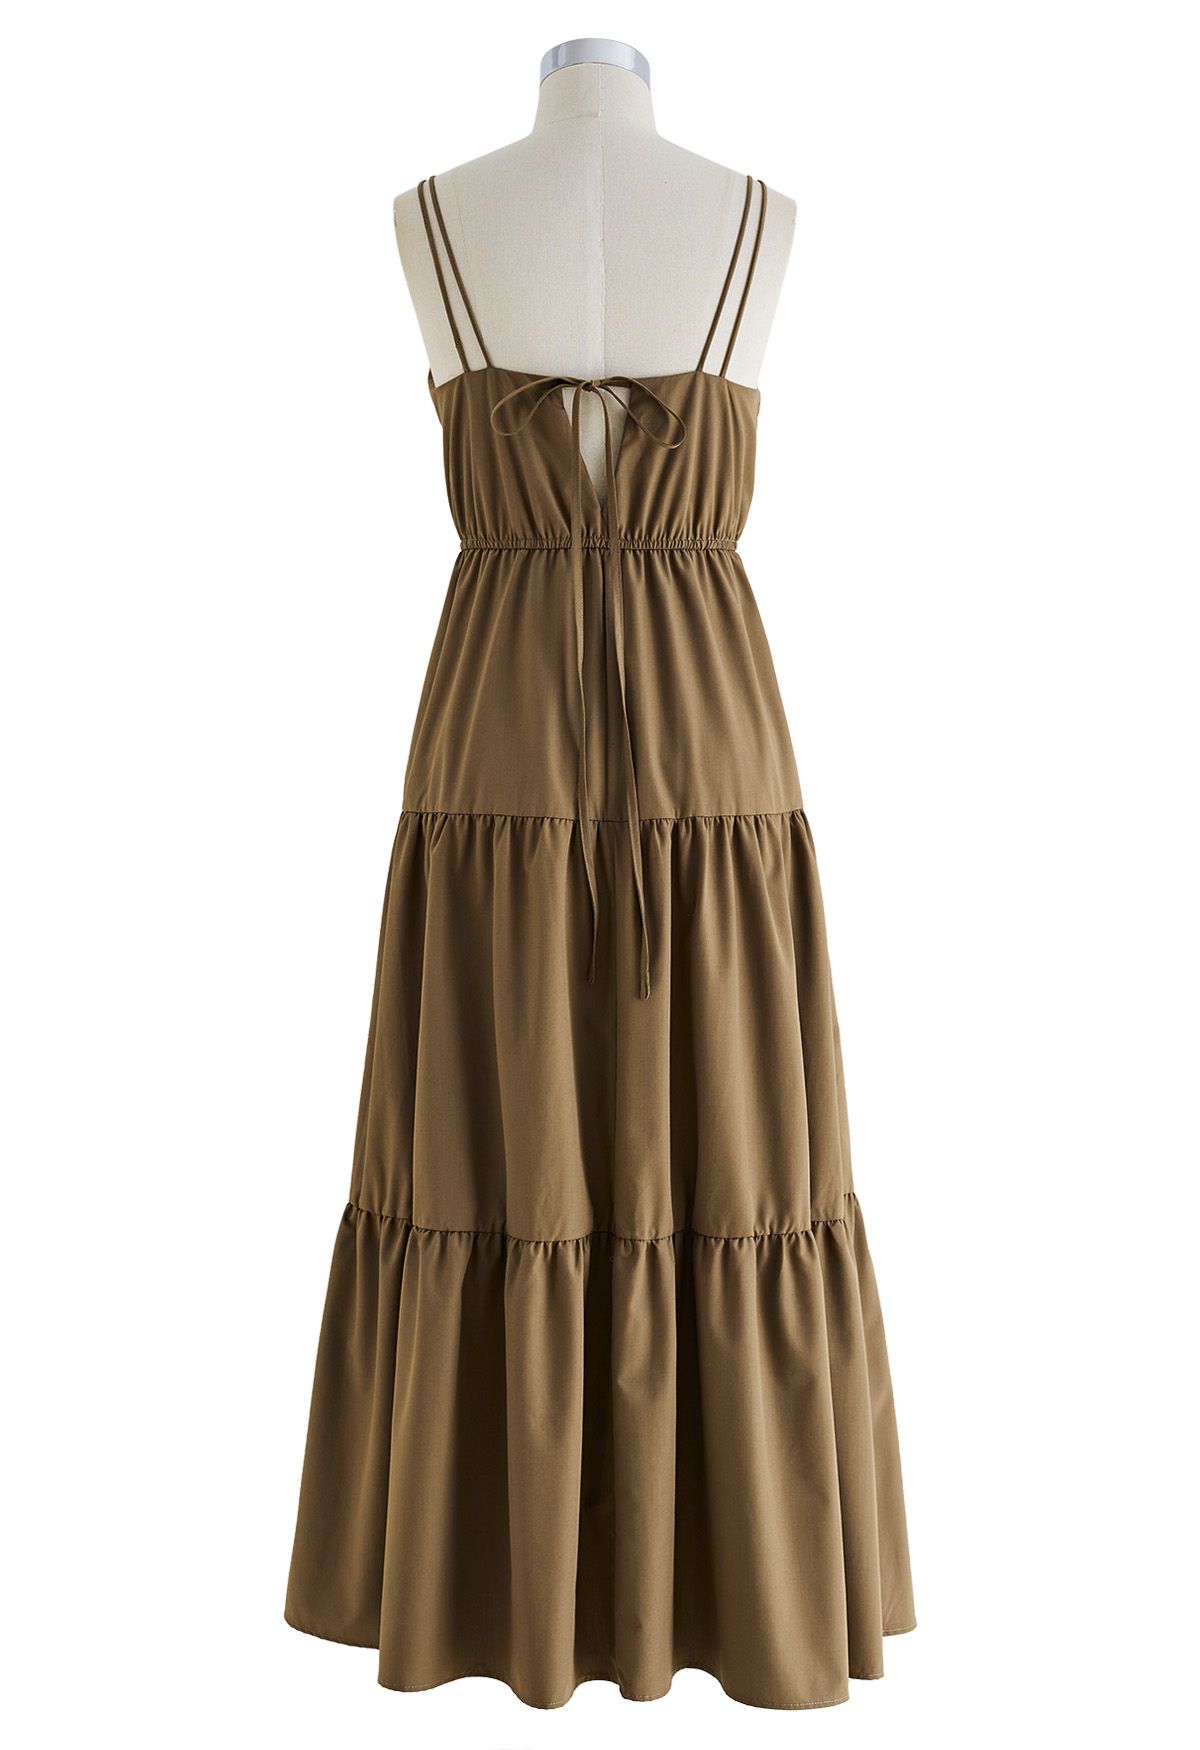 Double Straps Tie-Back Cami Dress in Brown